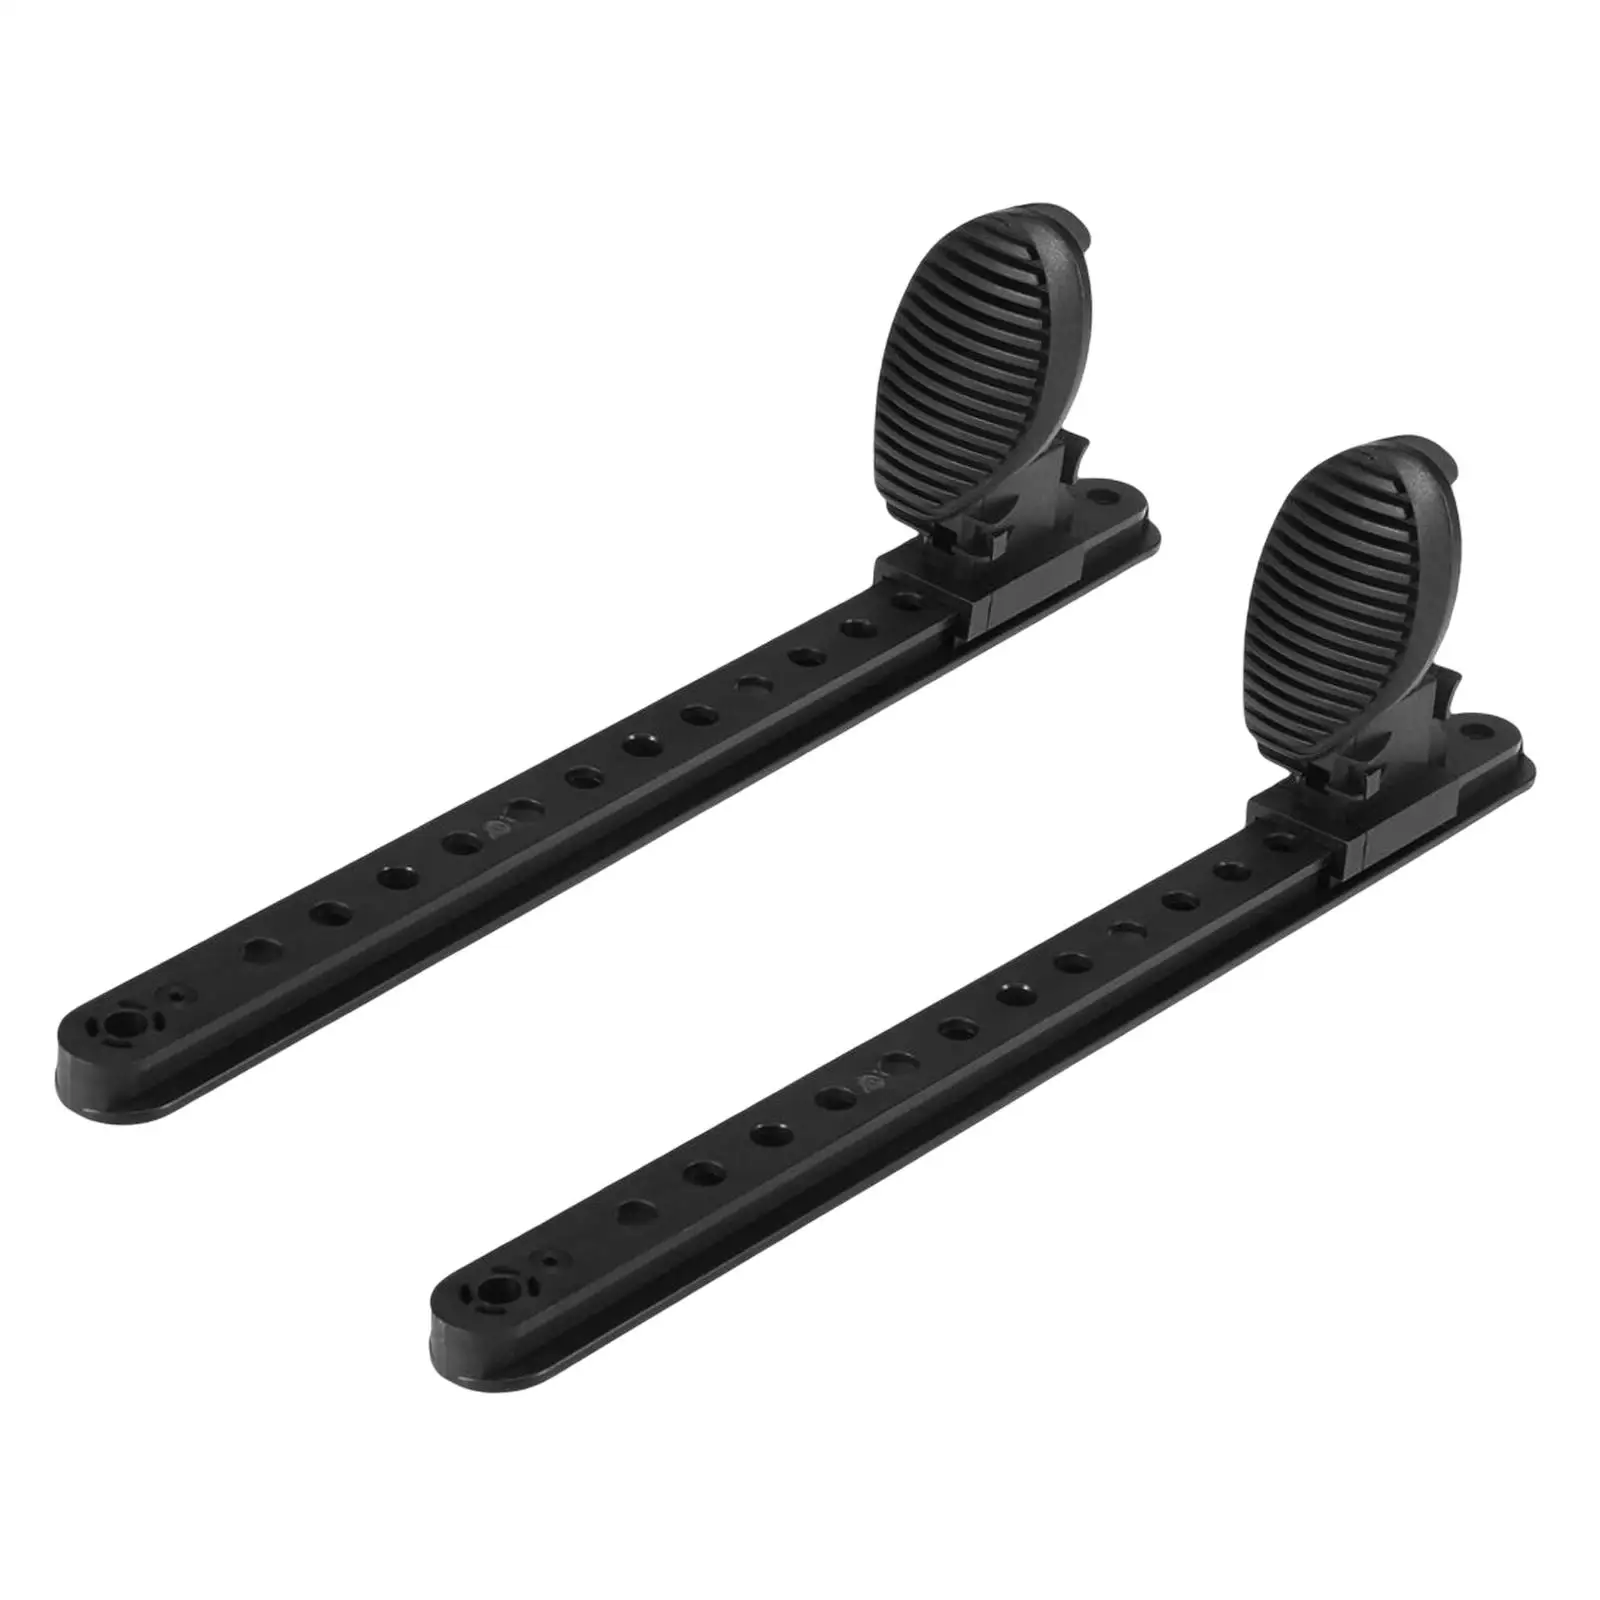 2x Kayak Foot Pegs Foot Portable Footboard Pedal for Canoe